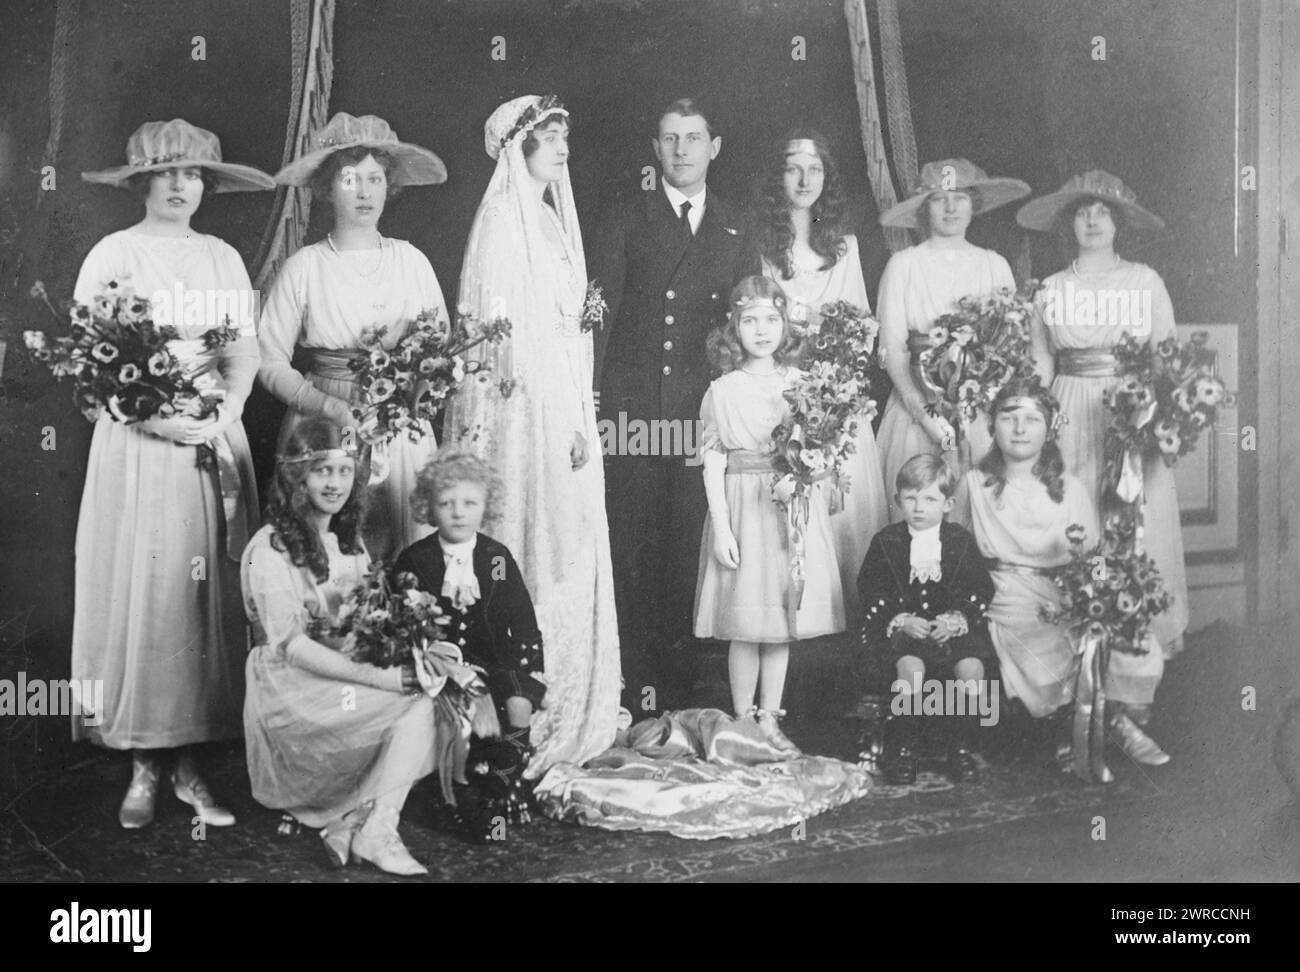 Princess Patricia's Wedding, Photograph shows the wedding of Princess Patricia of Connaught (later Lady Patricia Ramsay) (1886-1974), a granddaughter of Queen Victoria and Admiral Sir Alexander Robert Maule Ramsay (1881-1972) who served as a British Royal Navy officer., 1919, Glass negatives, 1 negative: glass Stock Photo